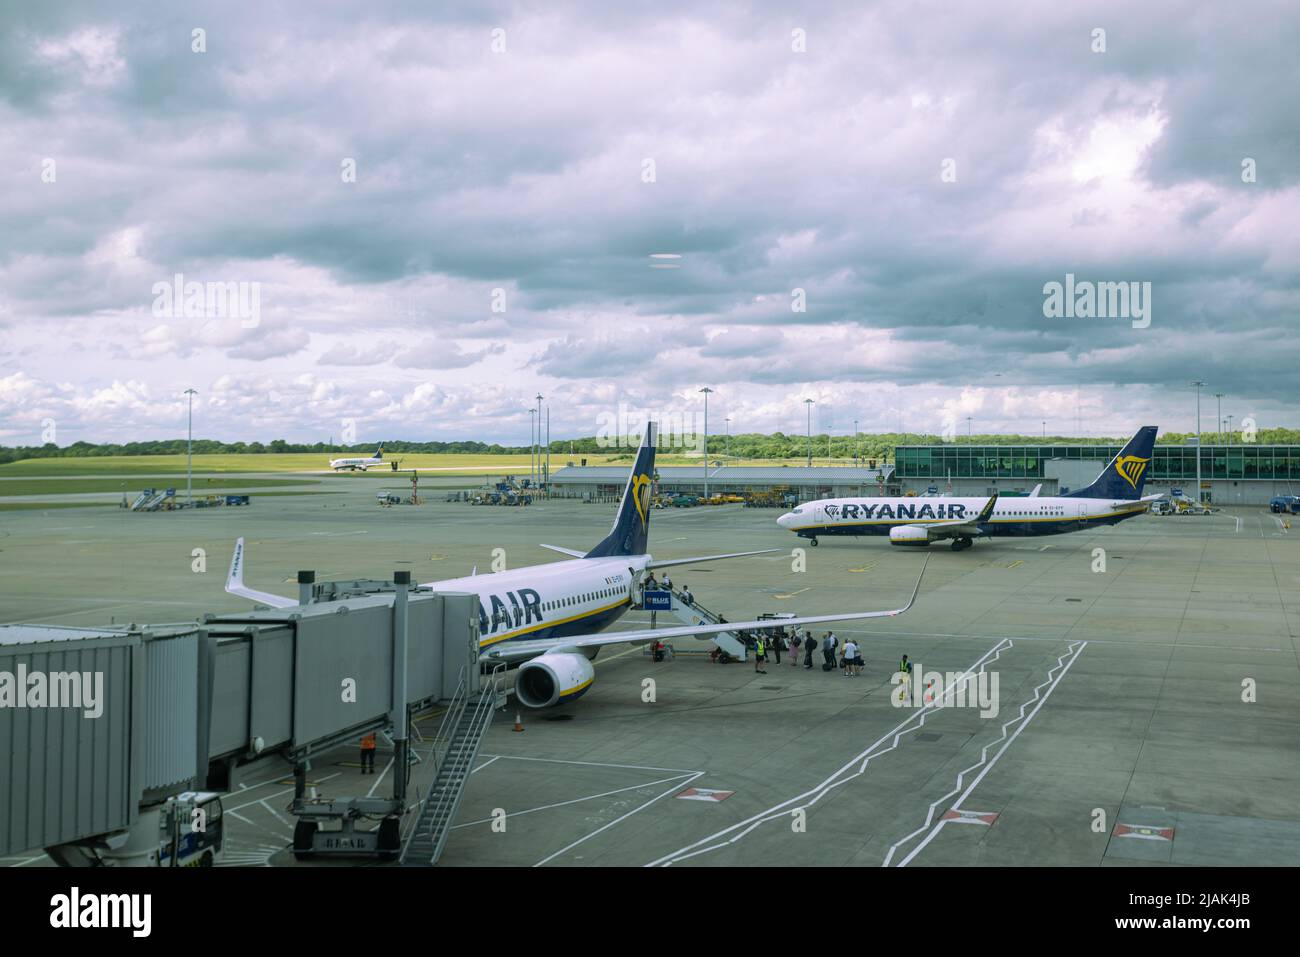 People boarding Ryanair airplane at London Stansted airport tarmac while another aircraft taxiing Stock Photo